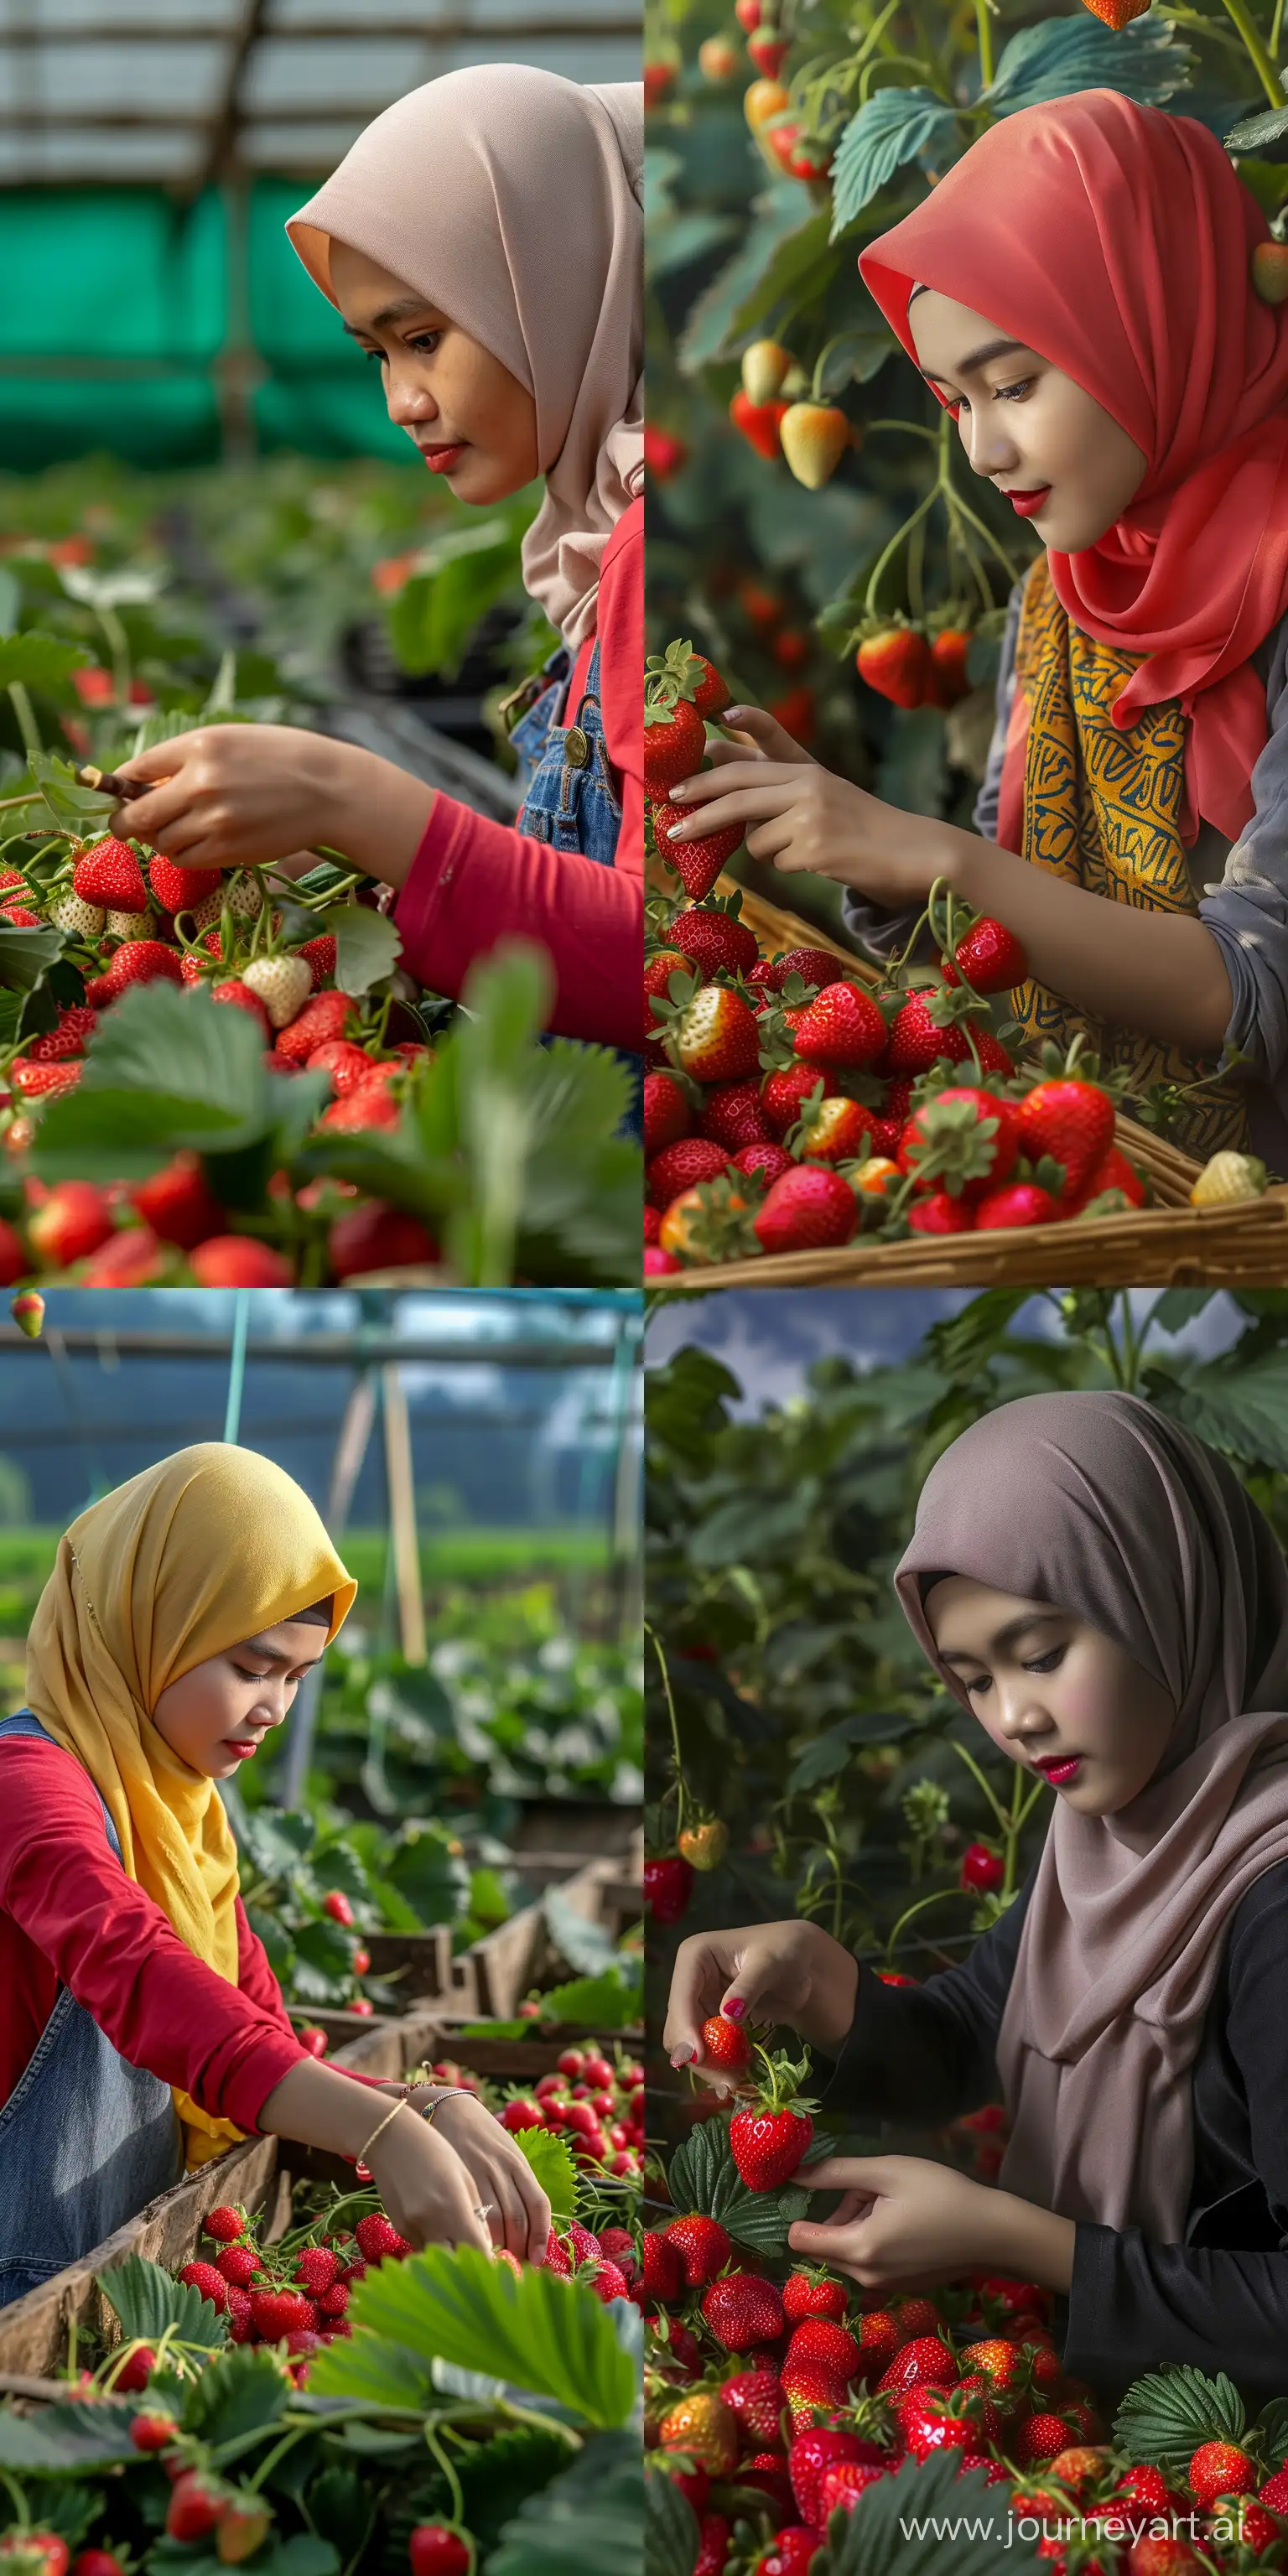 A young Indonesian muslim woman, 19 years old, picking strawberries in a detailed rural setting, realistic style with vibrant colors, close-up shot capturing the intricate details of the fruit, taken with a high-resolution camera, DSLR, 4K, HD quality.  --ar 1:2